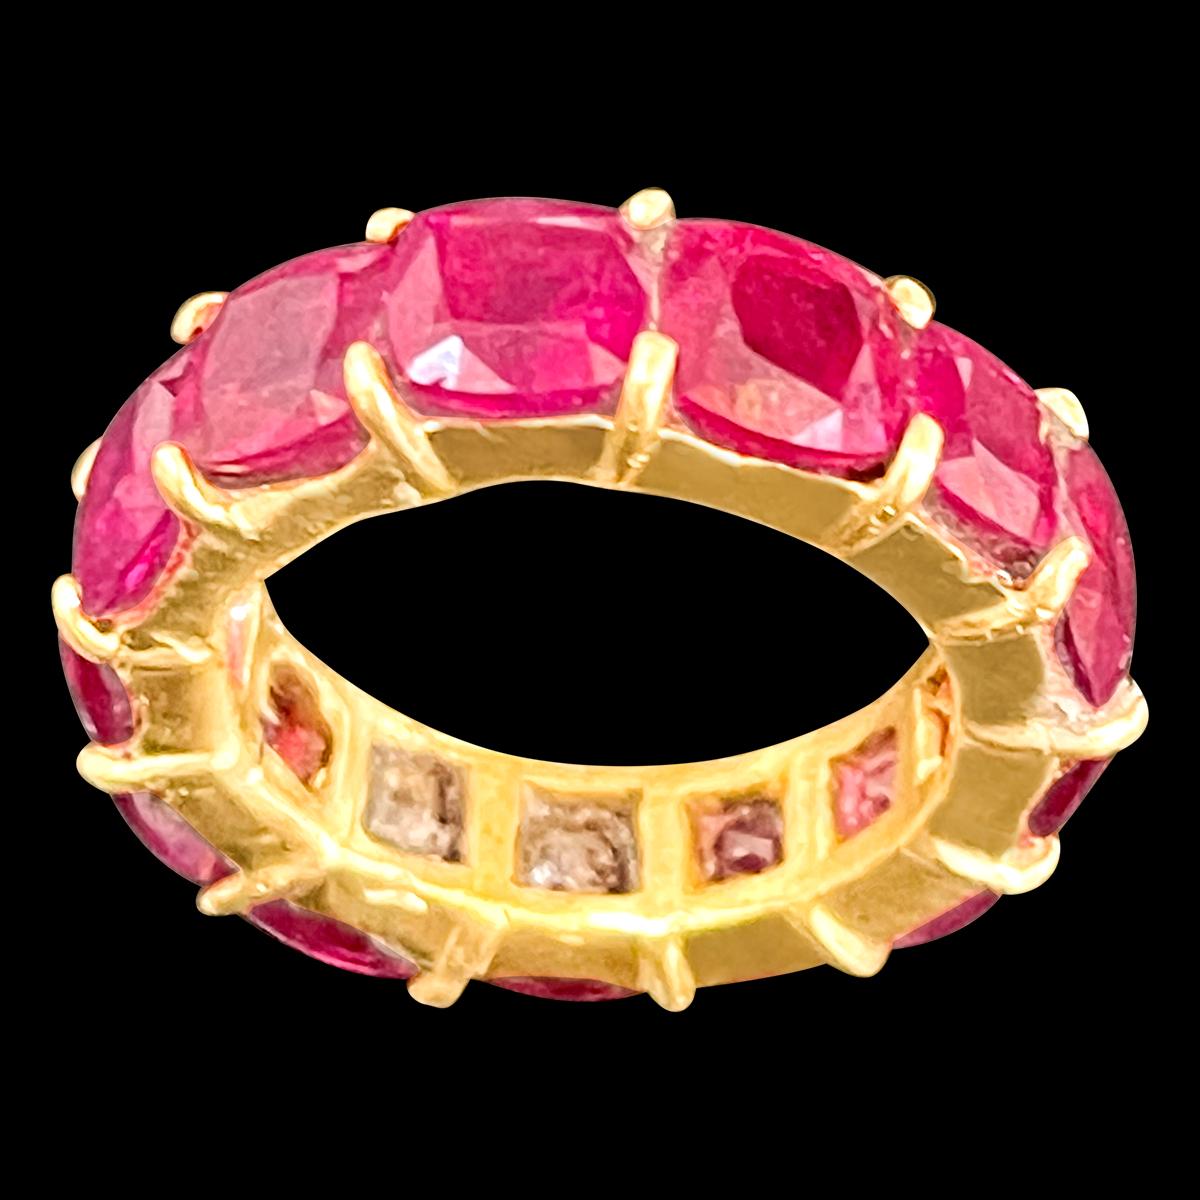 Hand Made ring
1 Ct Each Cushion Shape Treated Ruby  13 Ct Anniversary Eternity Band/Ring 18KYG
Eternity ring set all around with matching Ruby   solid 18 Karat Yellow Gold 
6 mm Wide band , Thickness 4.2mm
This eternity band features 13  Cushion